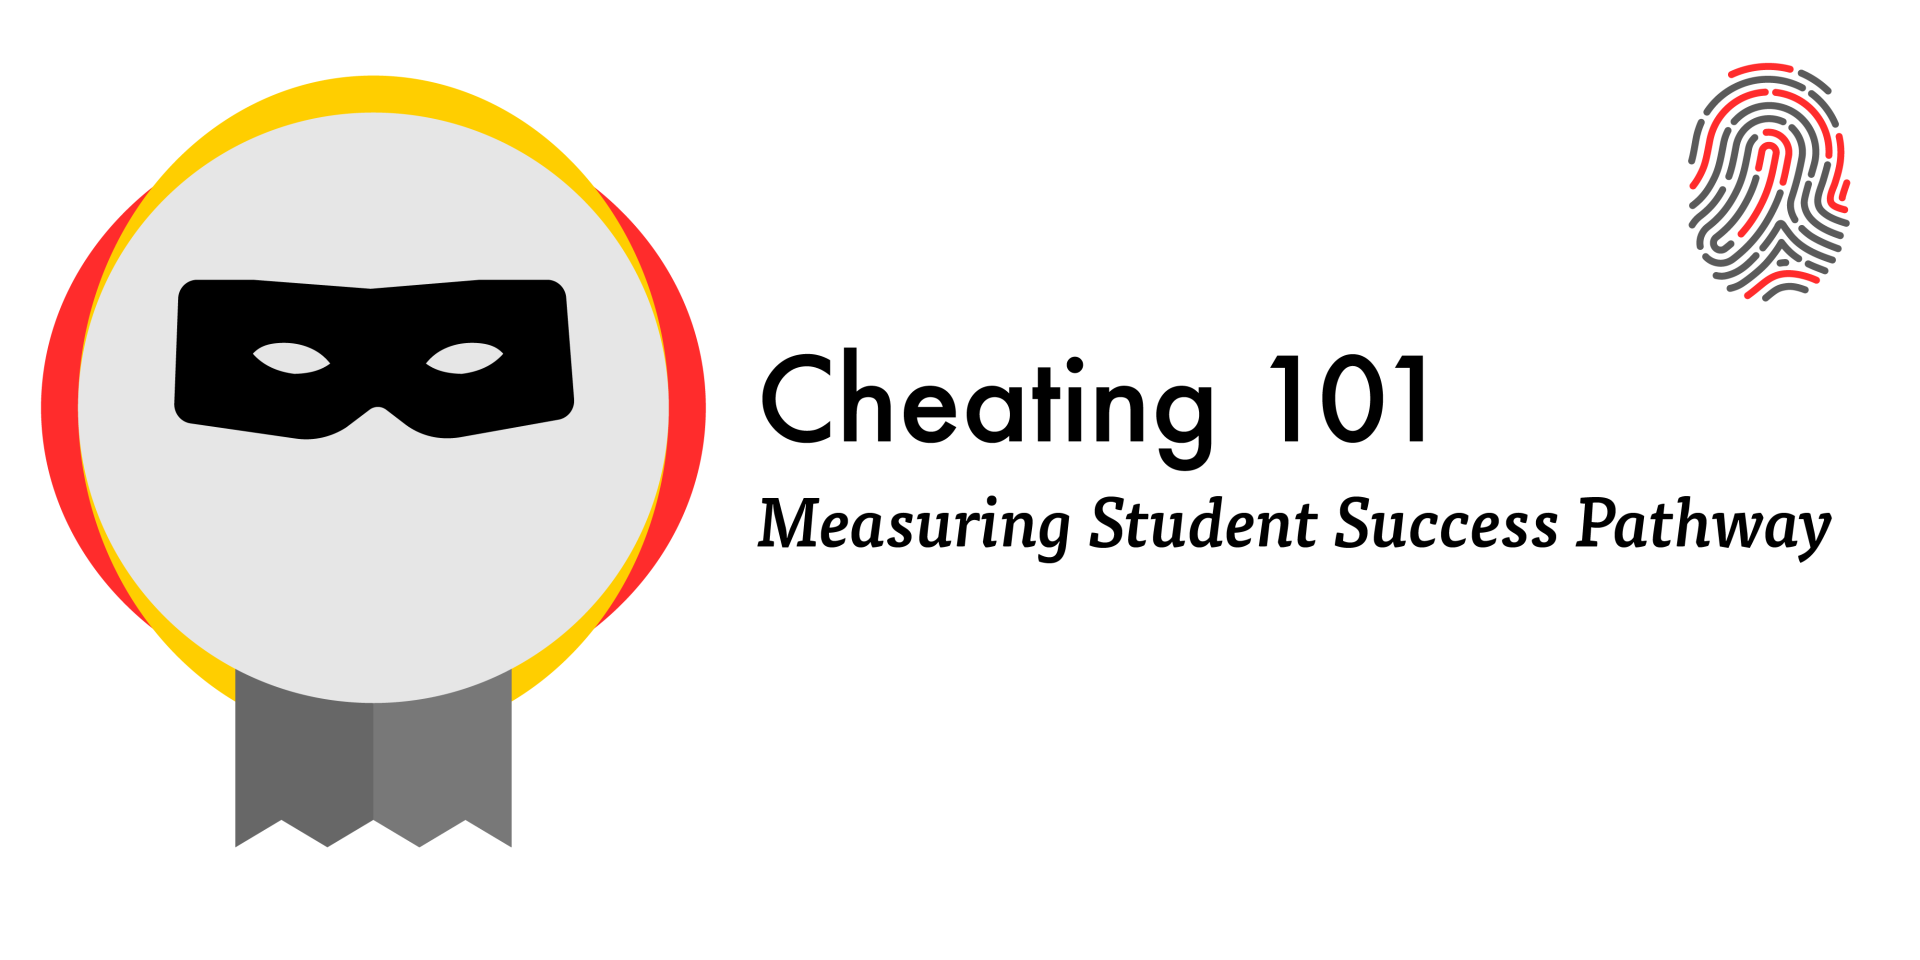 Cheating 101, Measuring Student Success Pathway